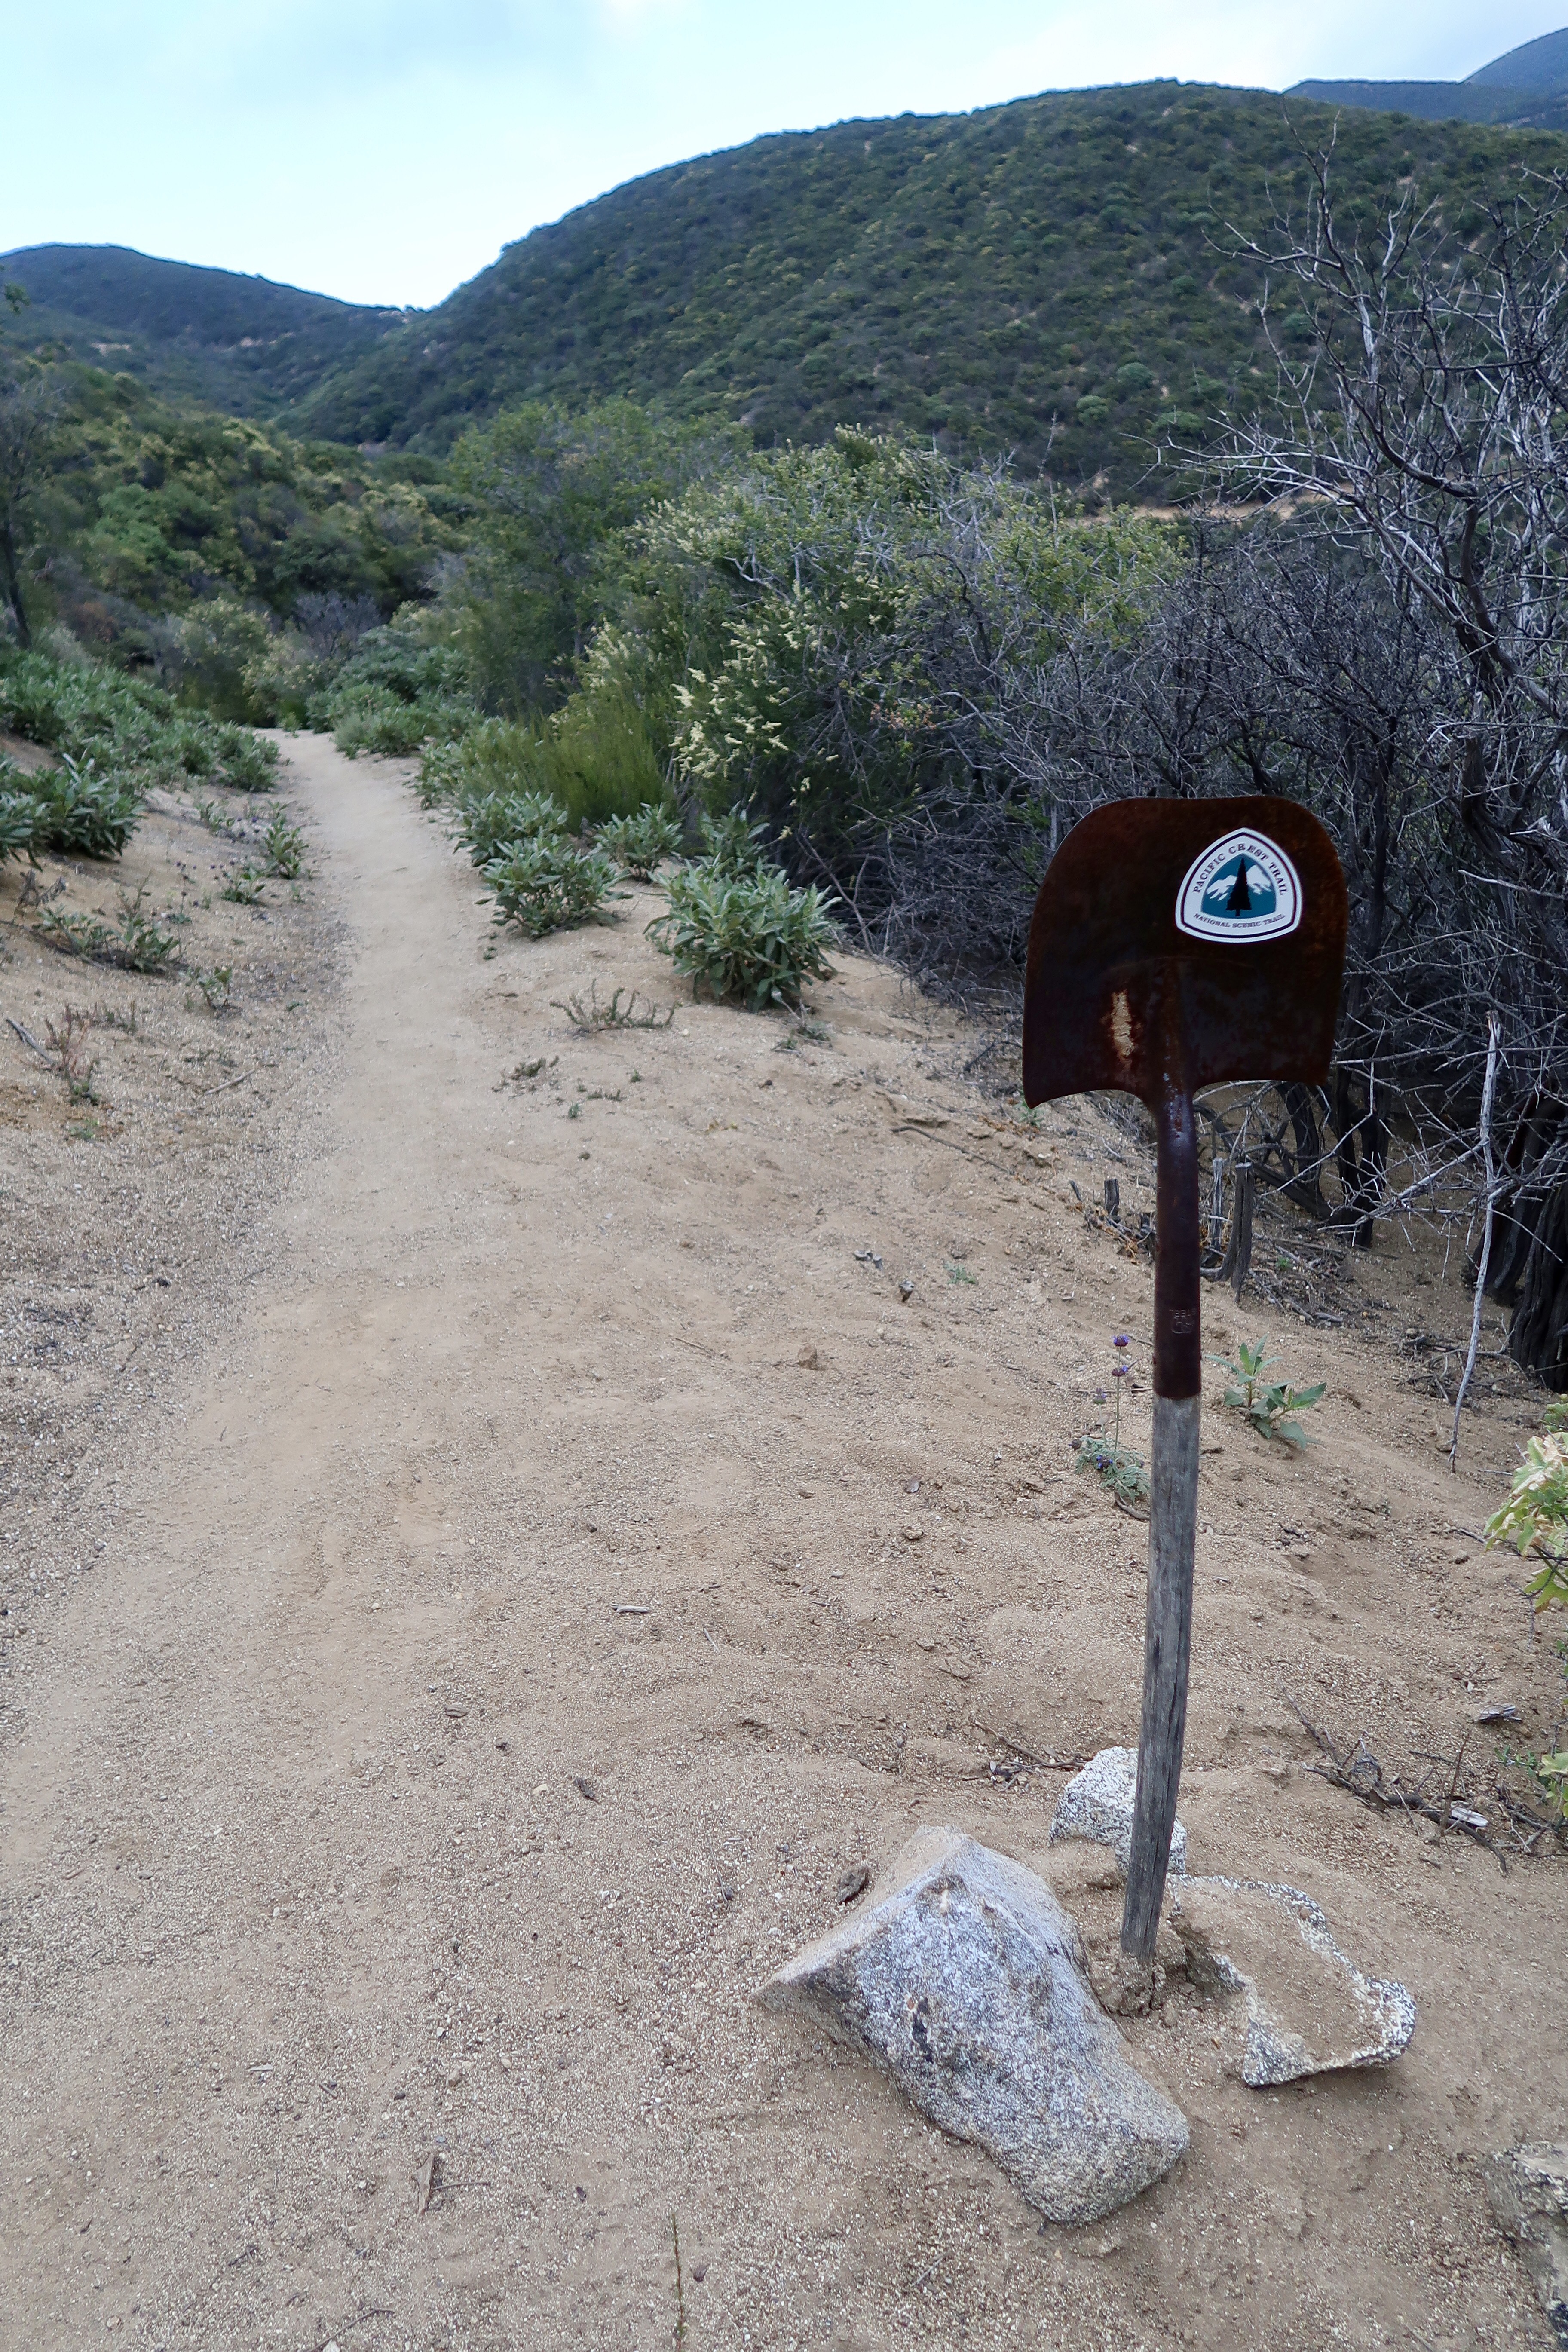 PCT Day 43 – A Discouraging Day